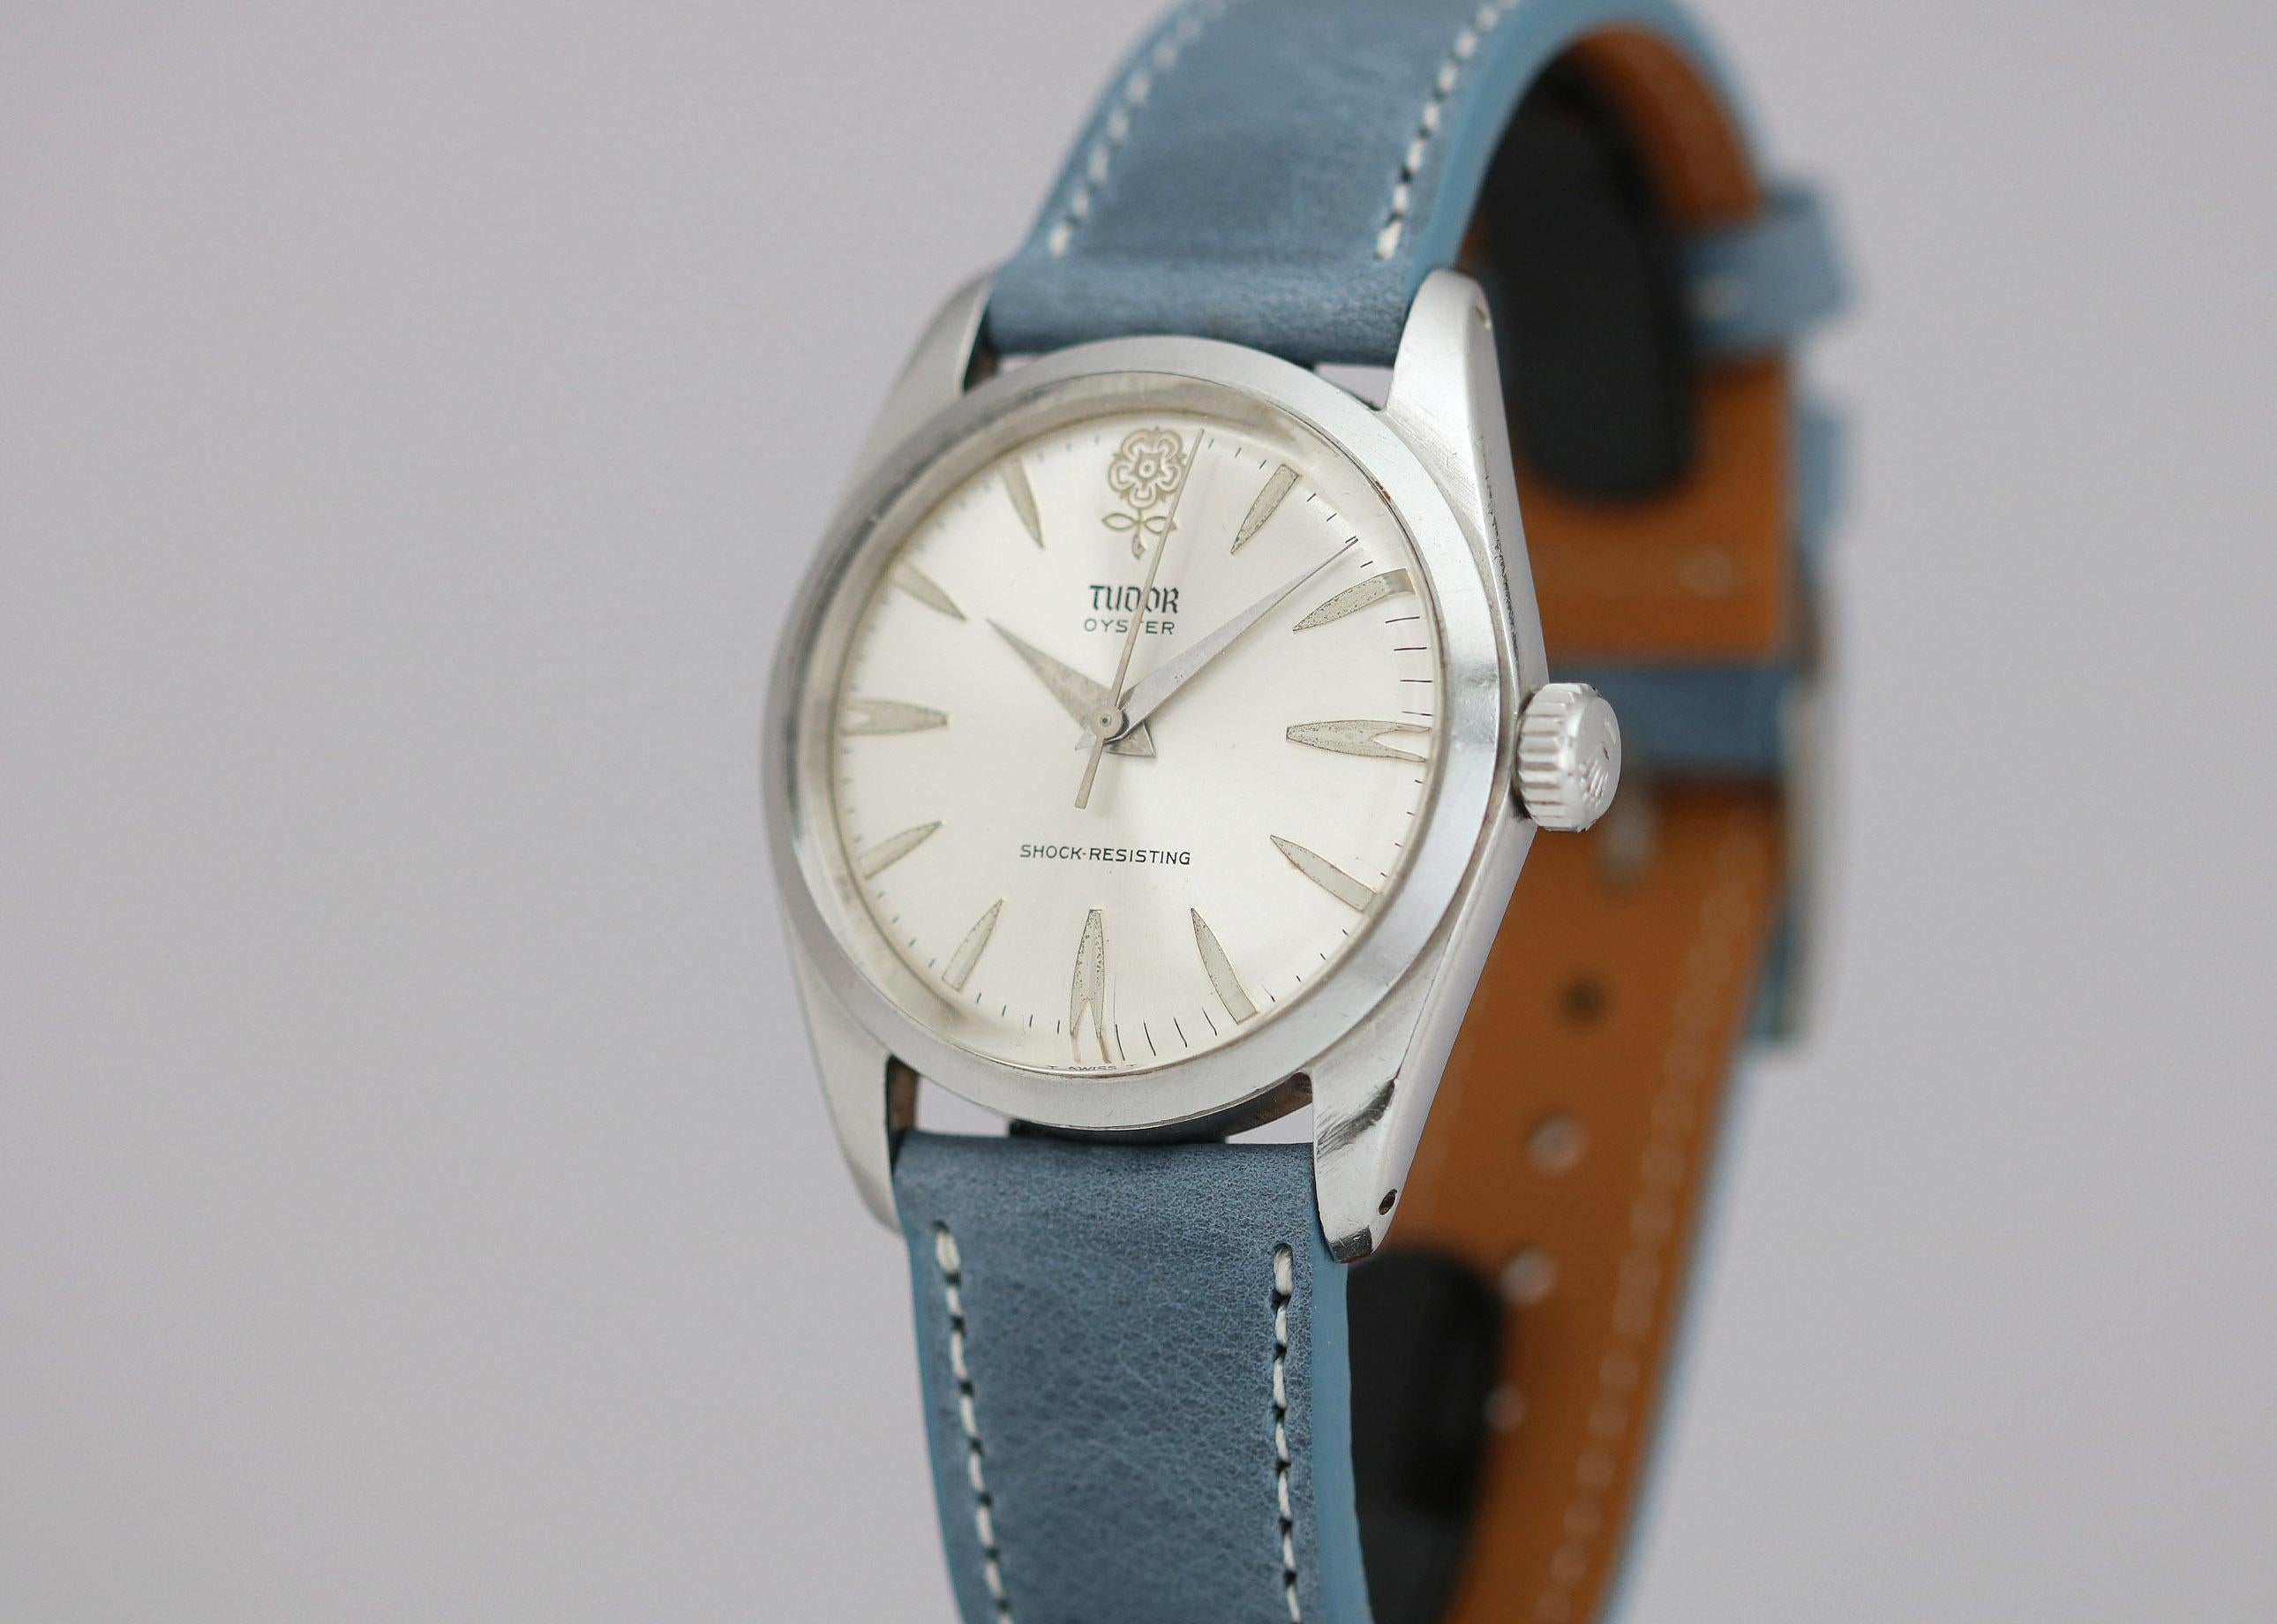 Tudor Stainless Steel Oyster Shock Resisting Ref 7934 Wristwatch, circa 1965 2